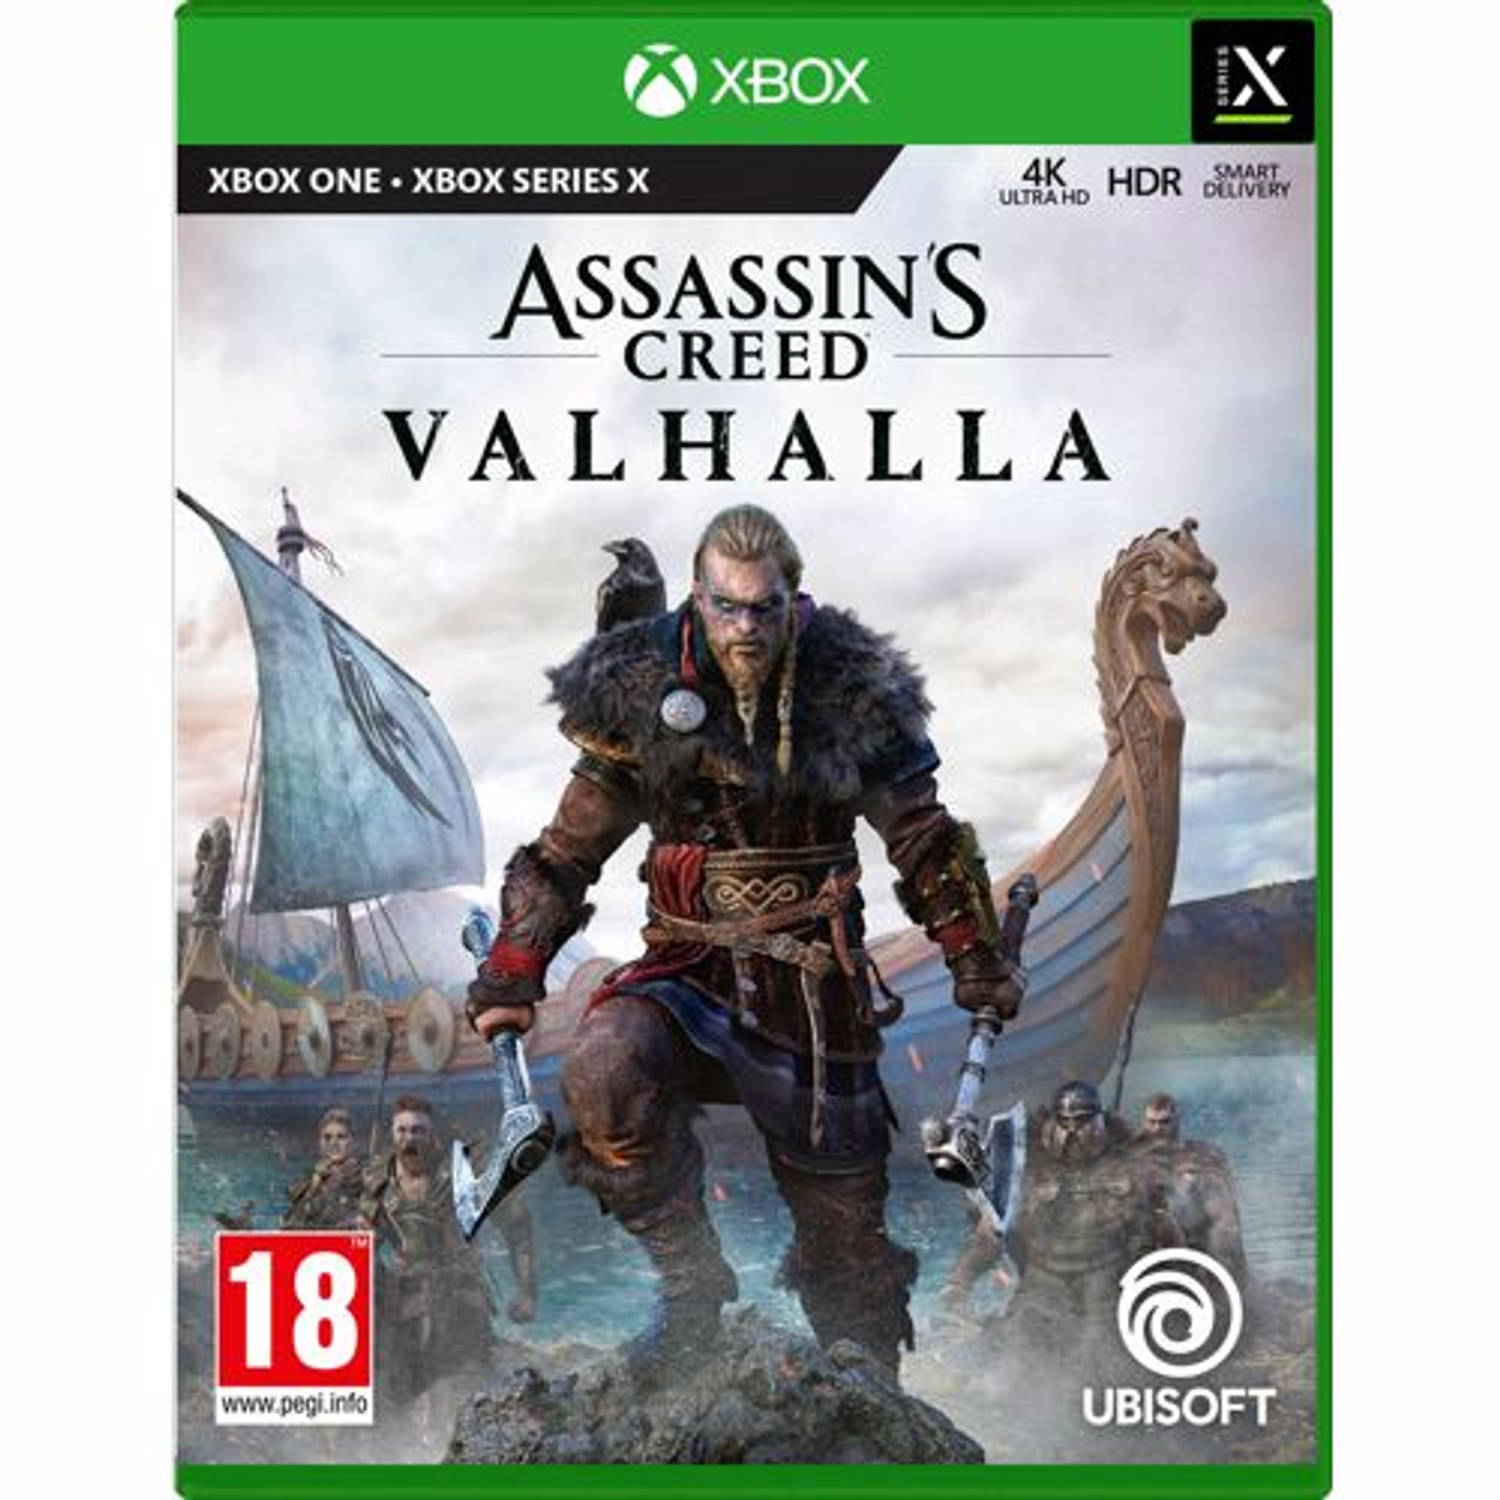 Assassin's Creed Valhalla | Xbox One